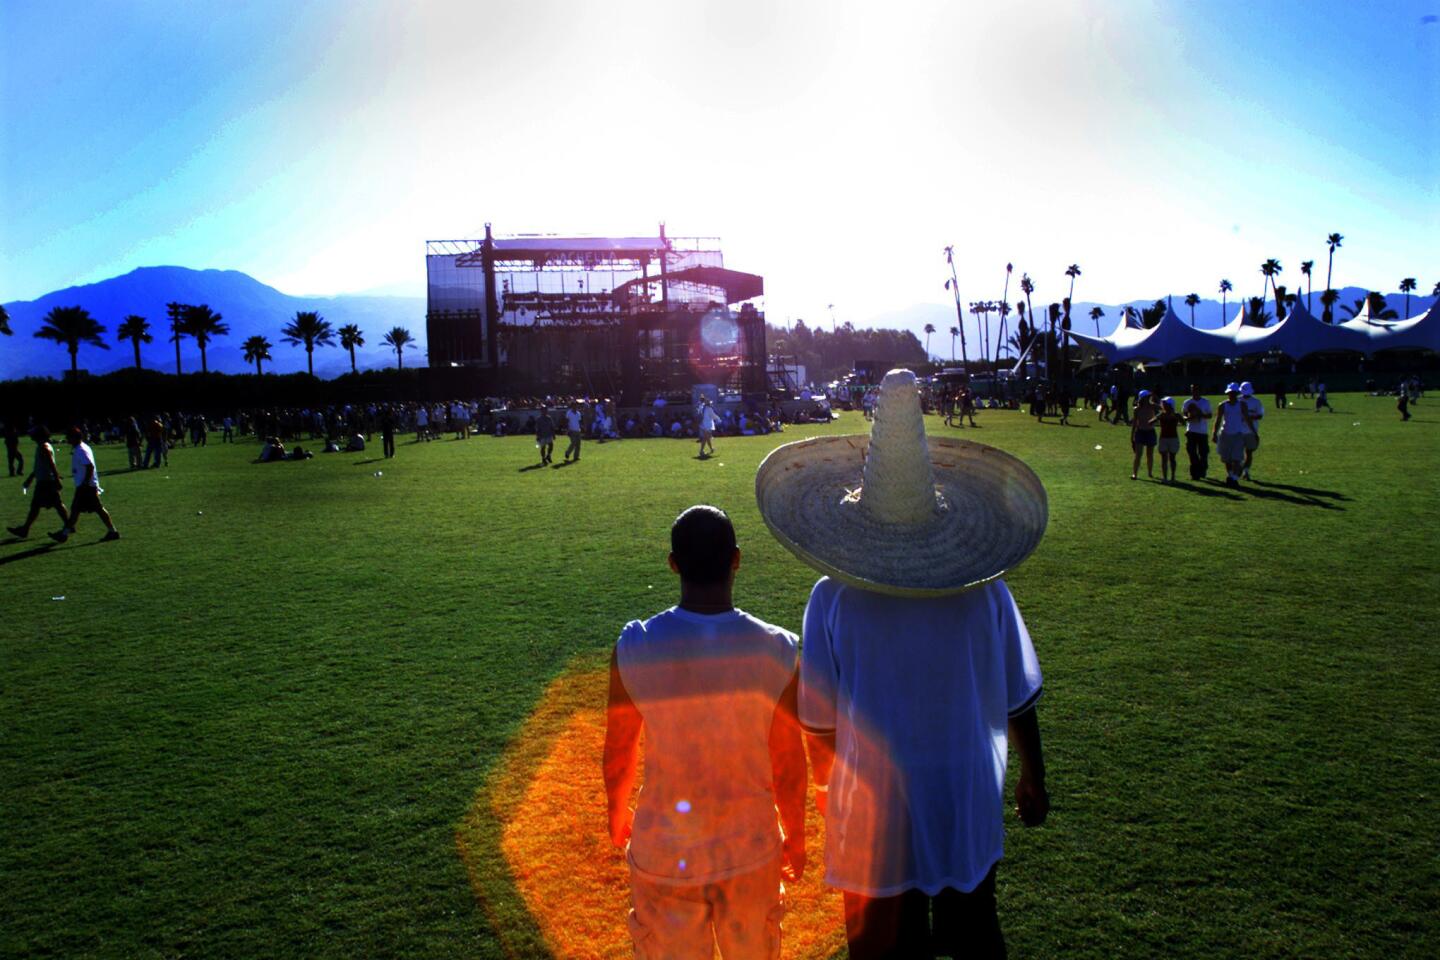 Dennis Carrillo wears a sombrero as a shield against the blistering sun as he and friend Dario Soto, both of Los Angeles, walk toward the stage at the Coachella Music Festival Oct. 9, 1999.